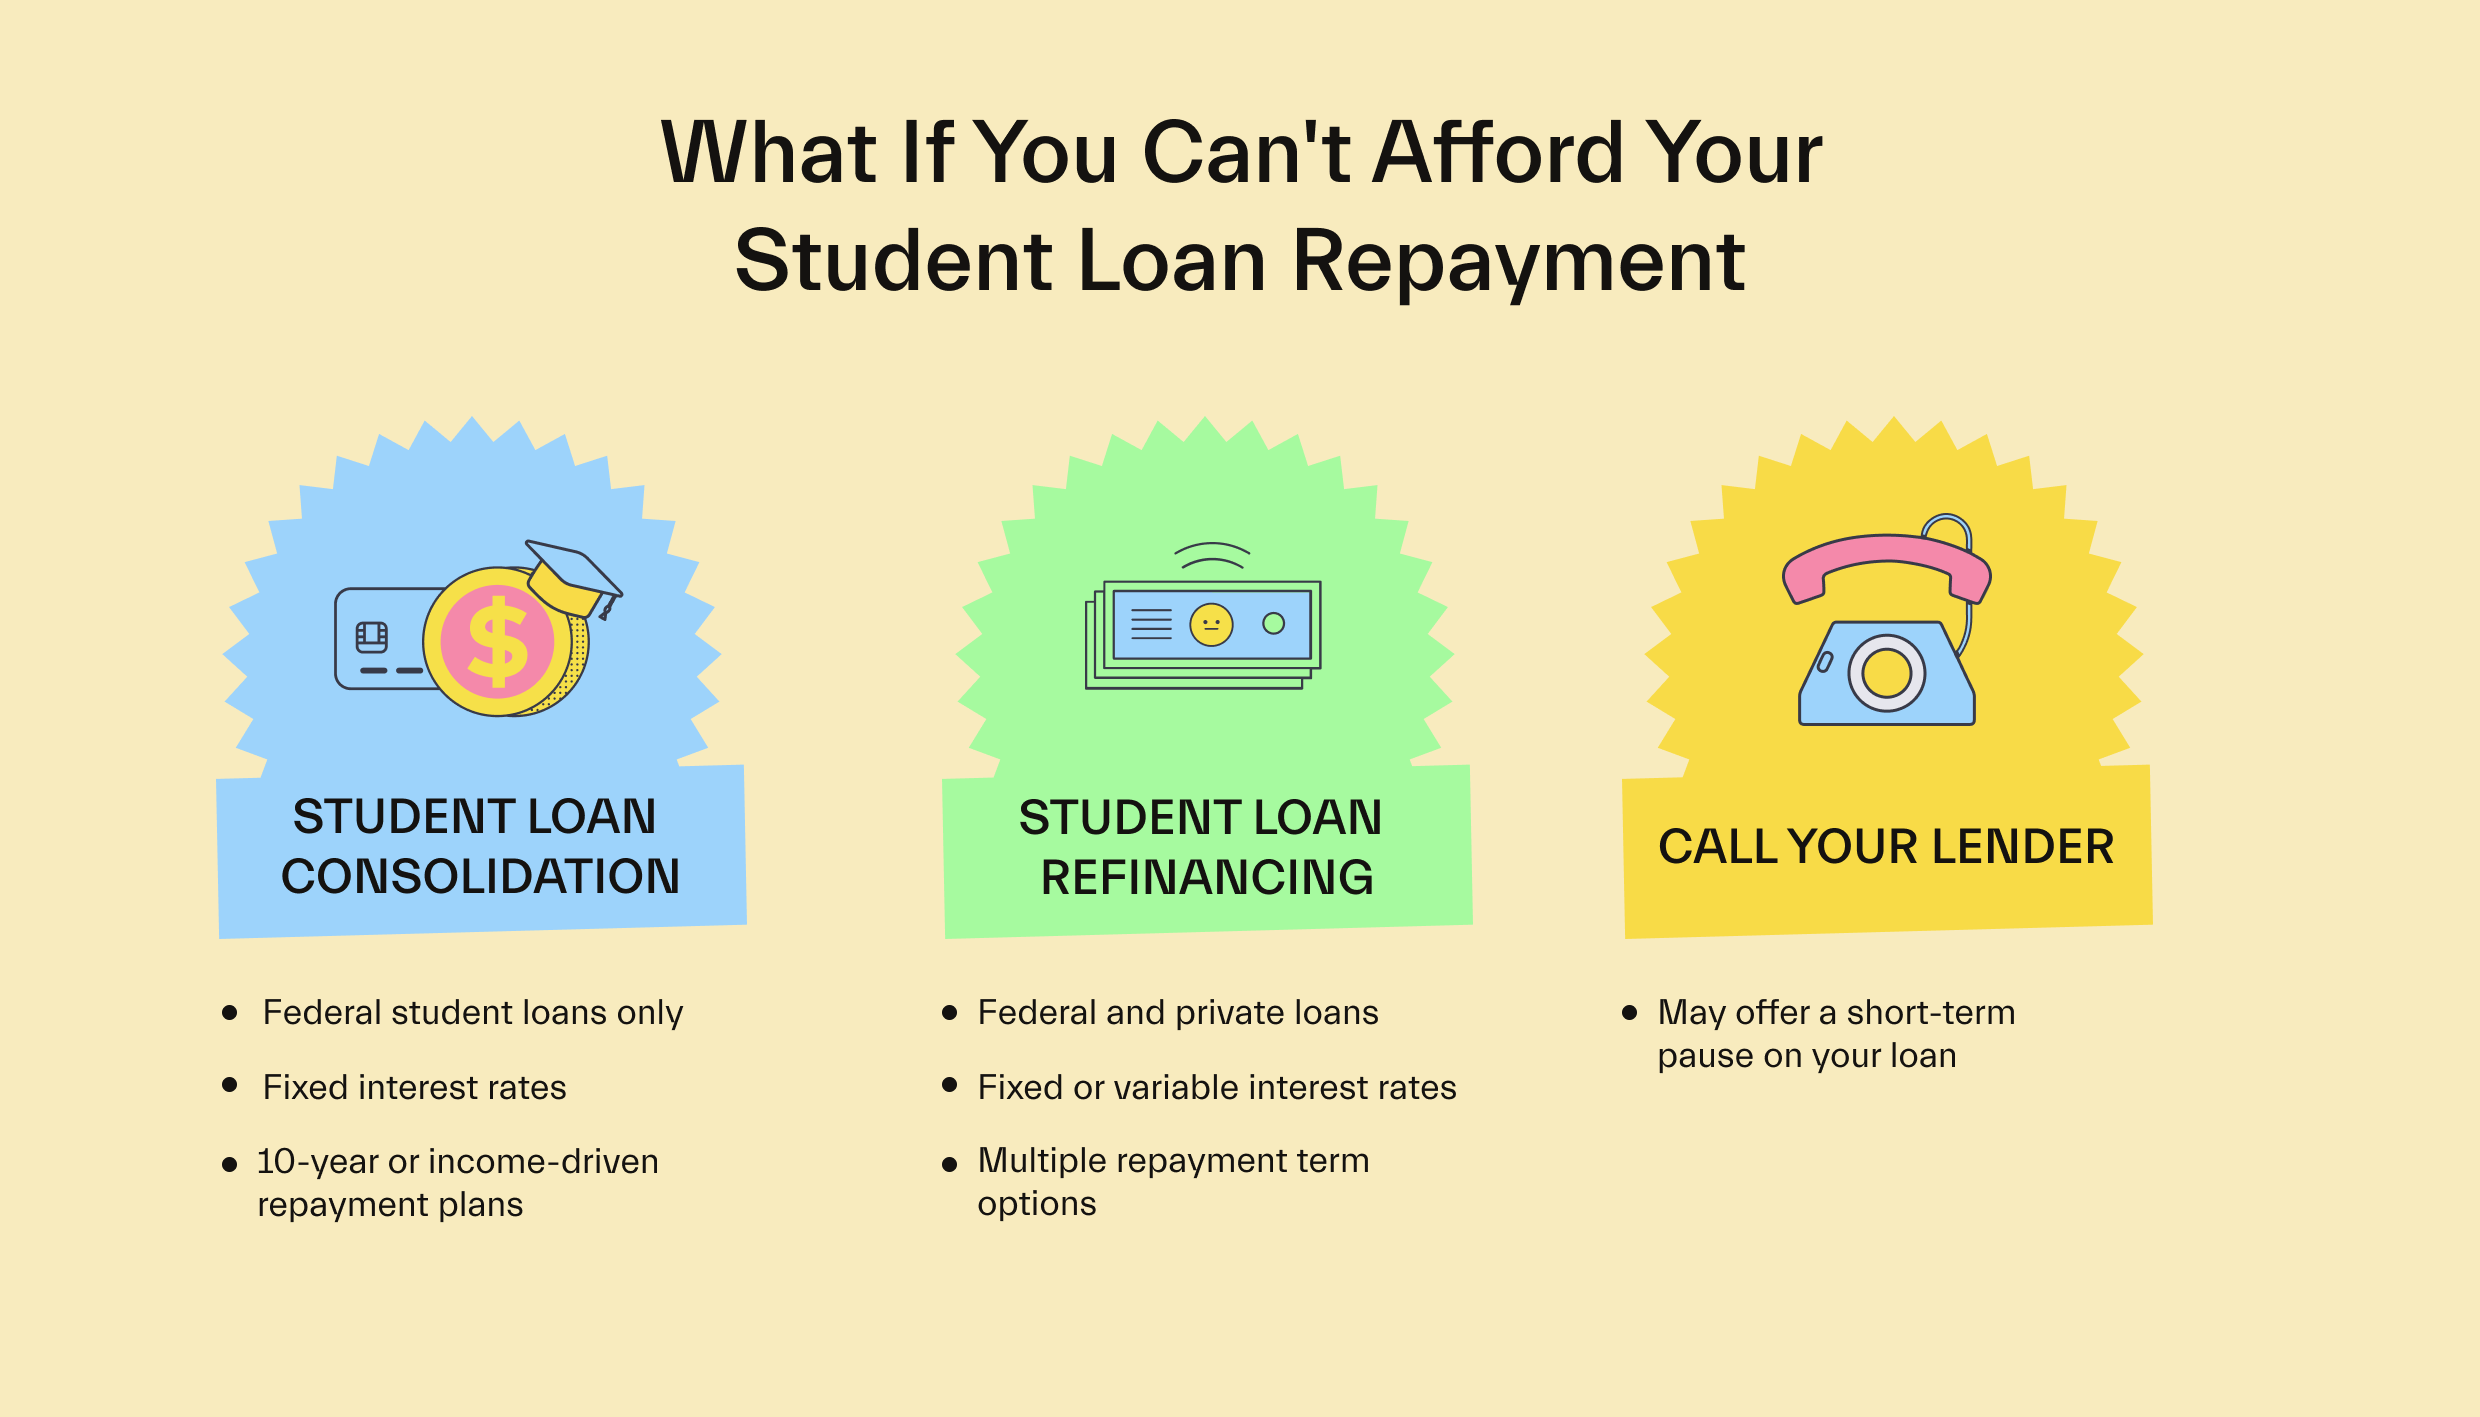 What If You Can’t Afford Student Loan Repayment?